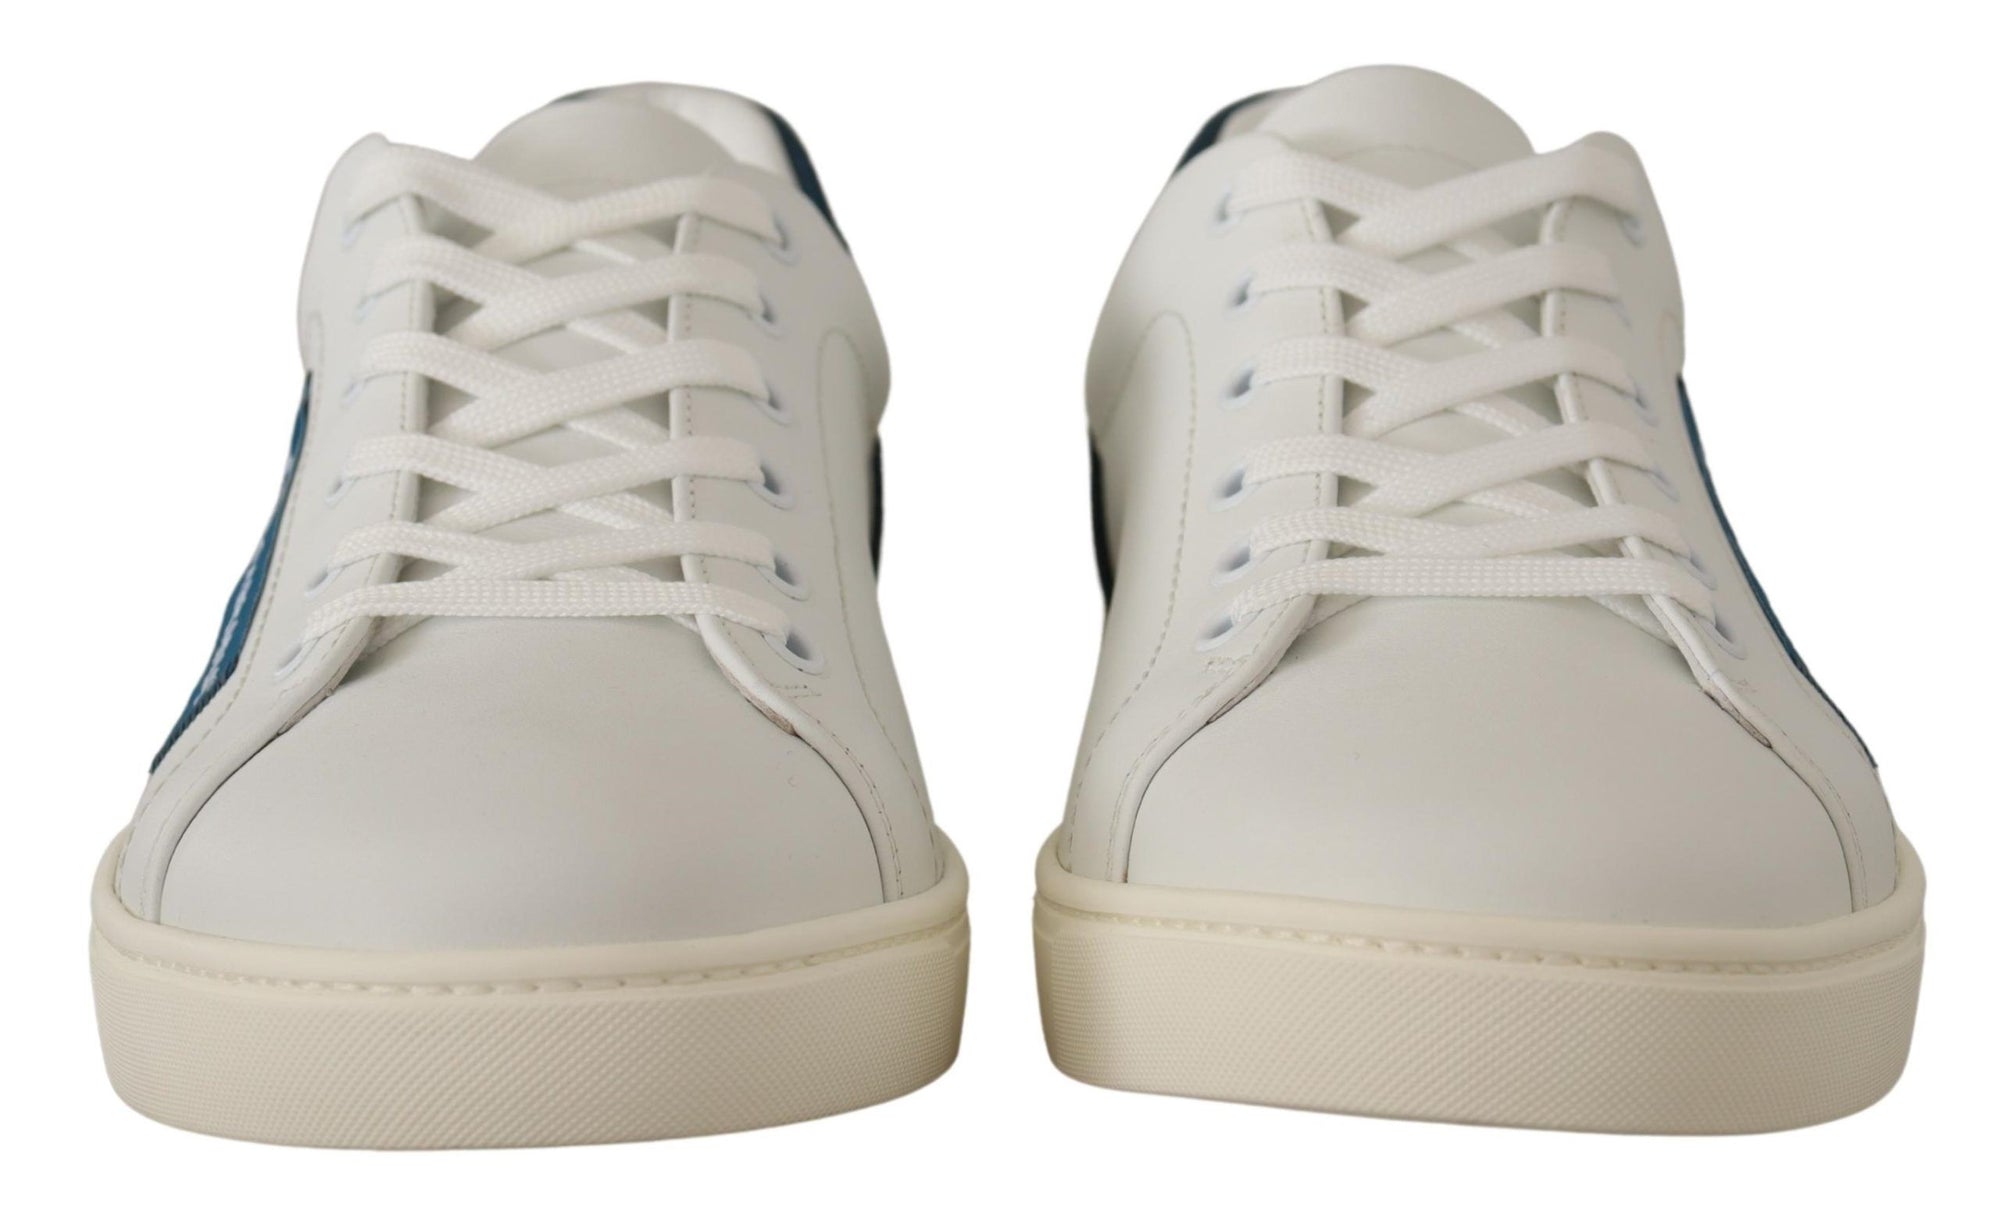 Chic White Leather Low-Top Sneakers